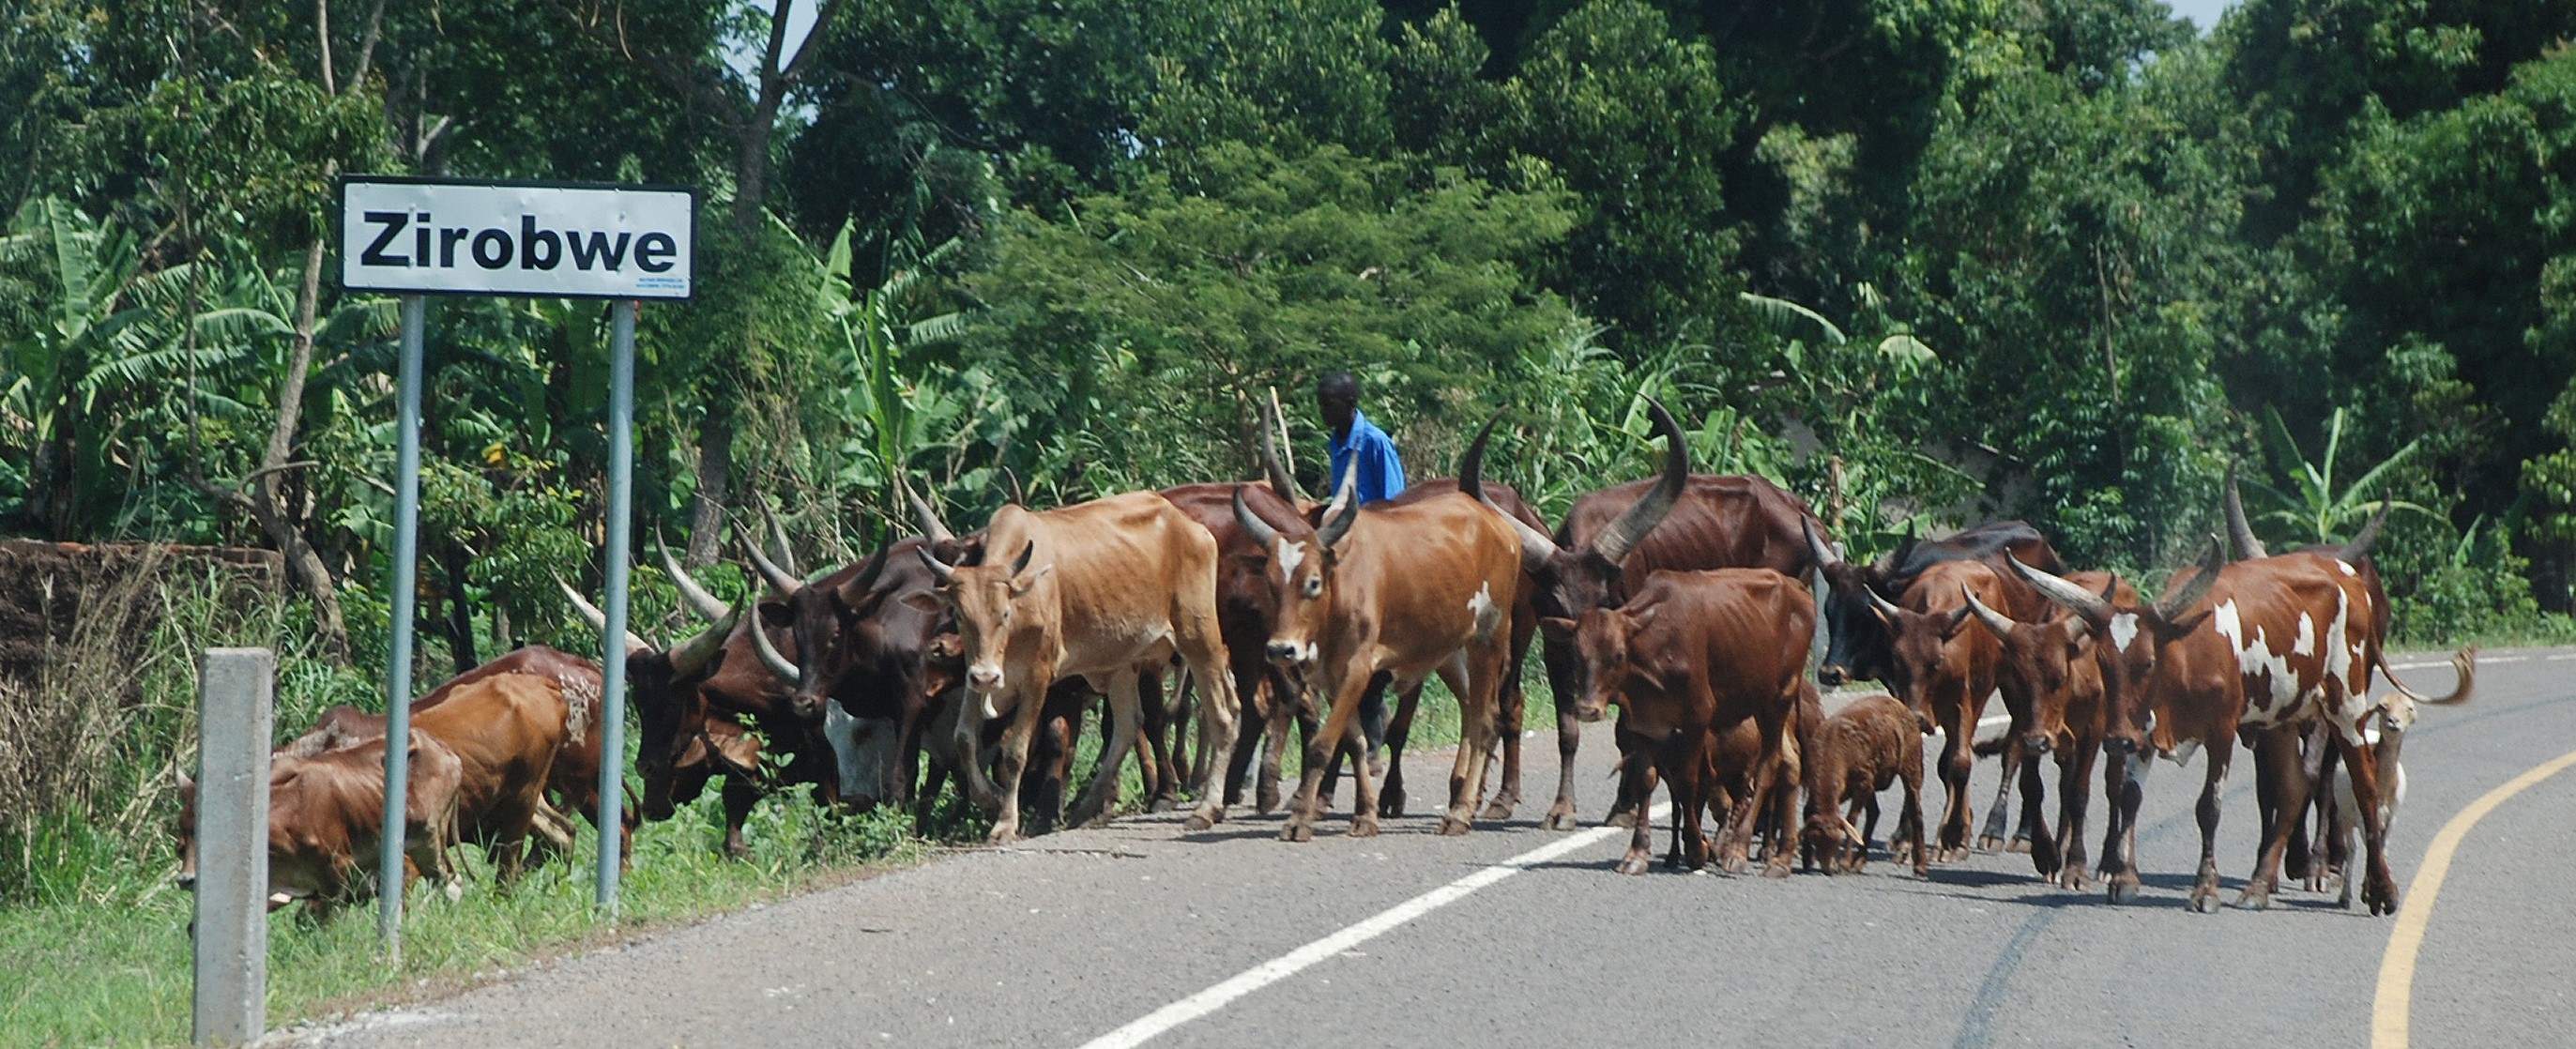 Cattle on the road in Luwero